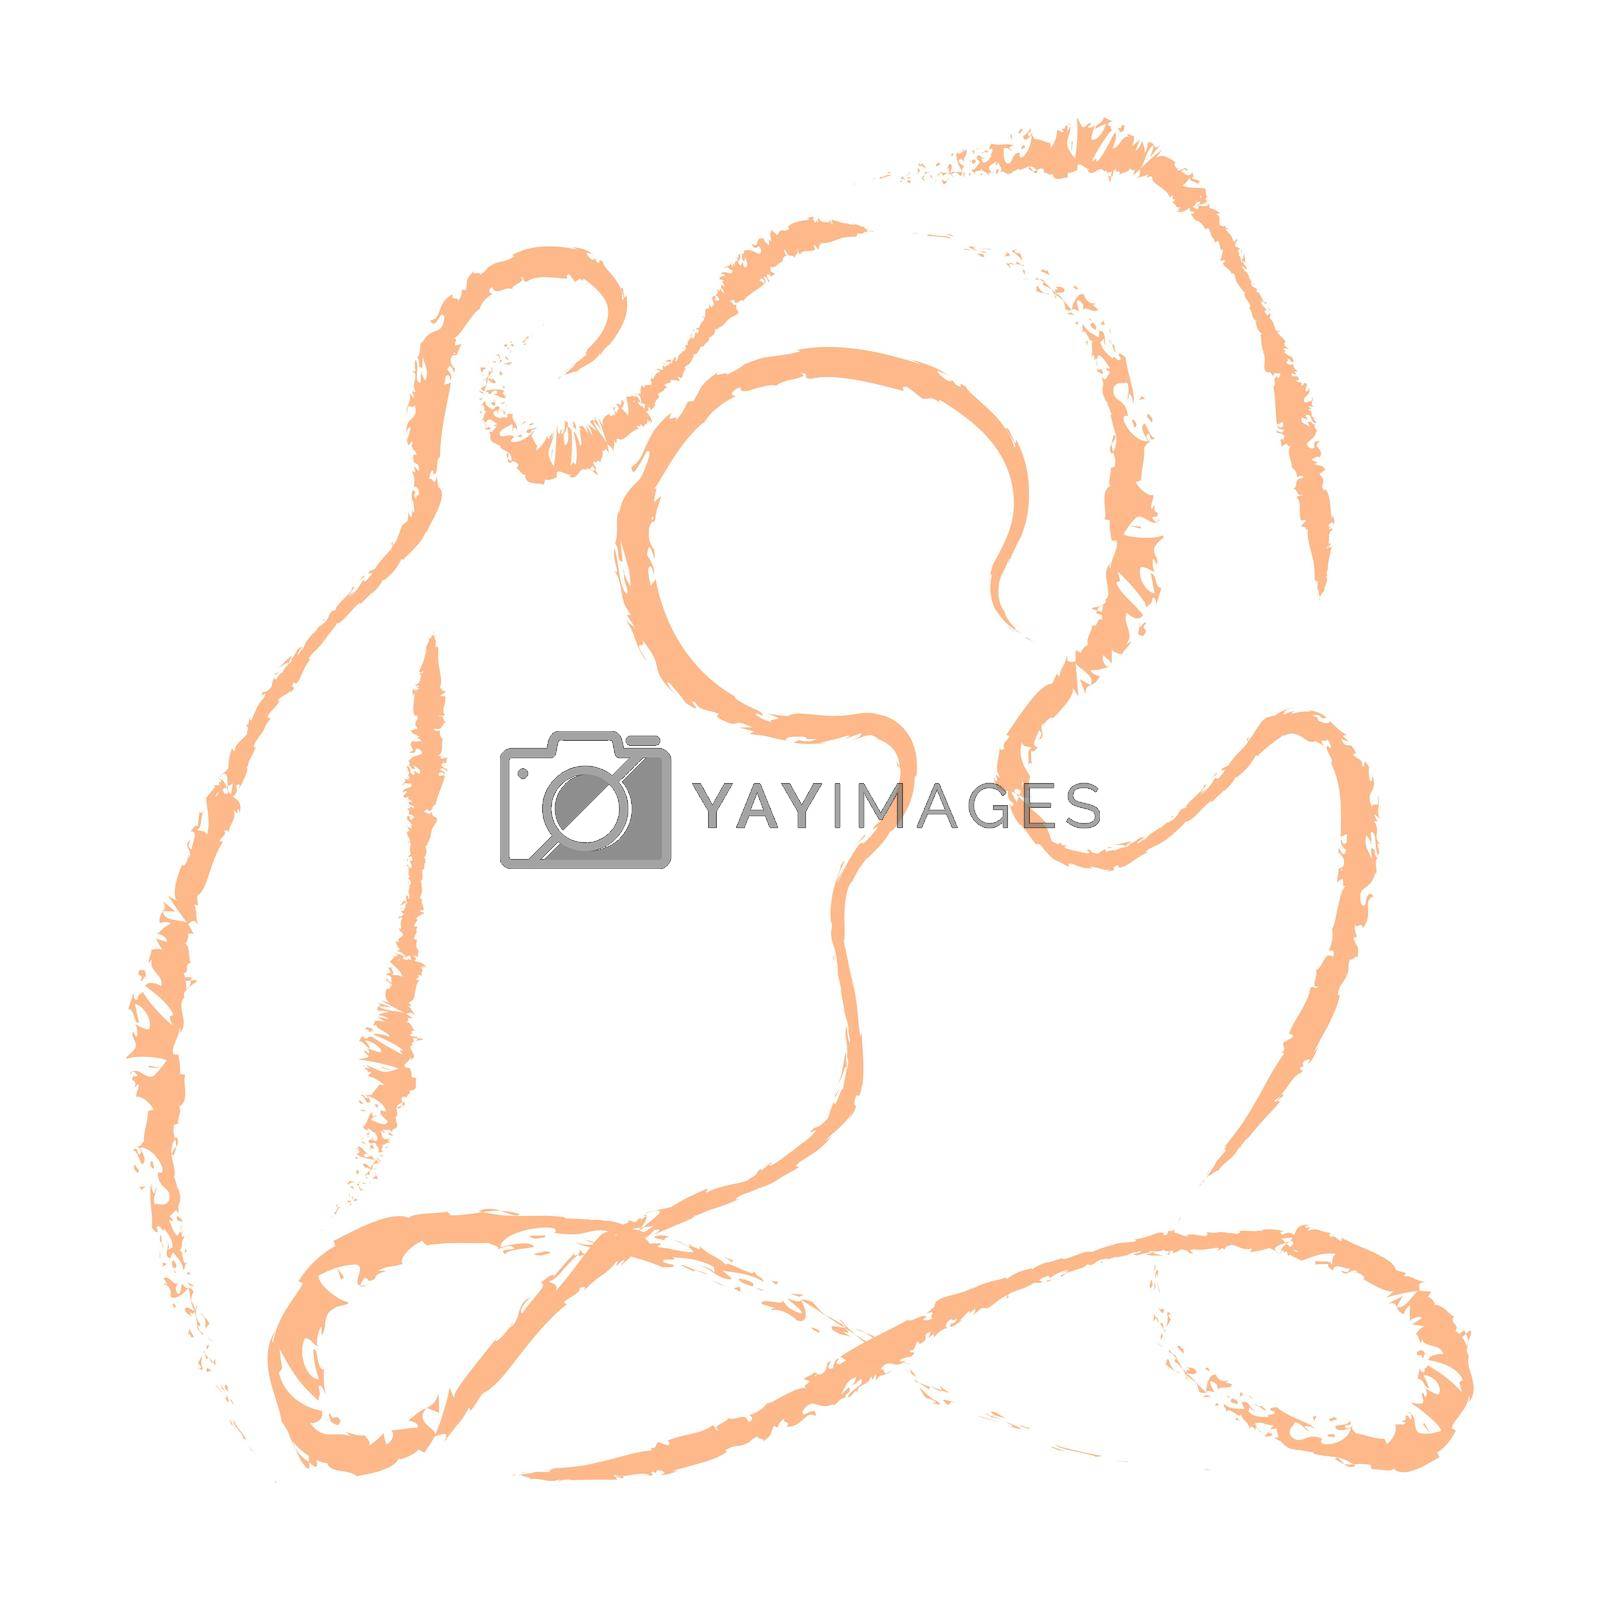 Yoga posture silhouette brochure element design. Meditation. Vector illustration with empty copy space for text. Editable shape for poster decoration. Creative and customizable component